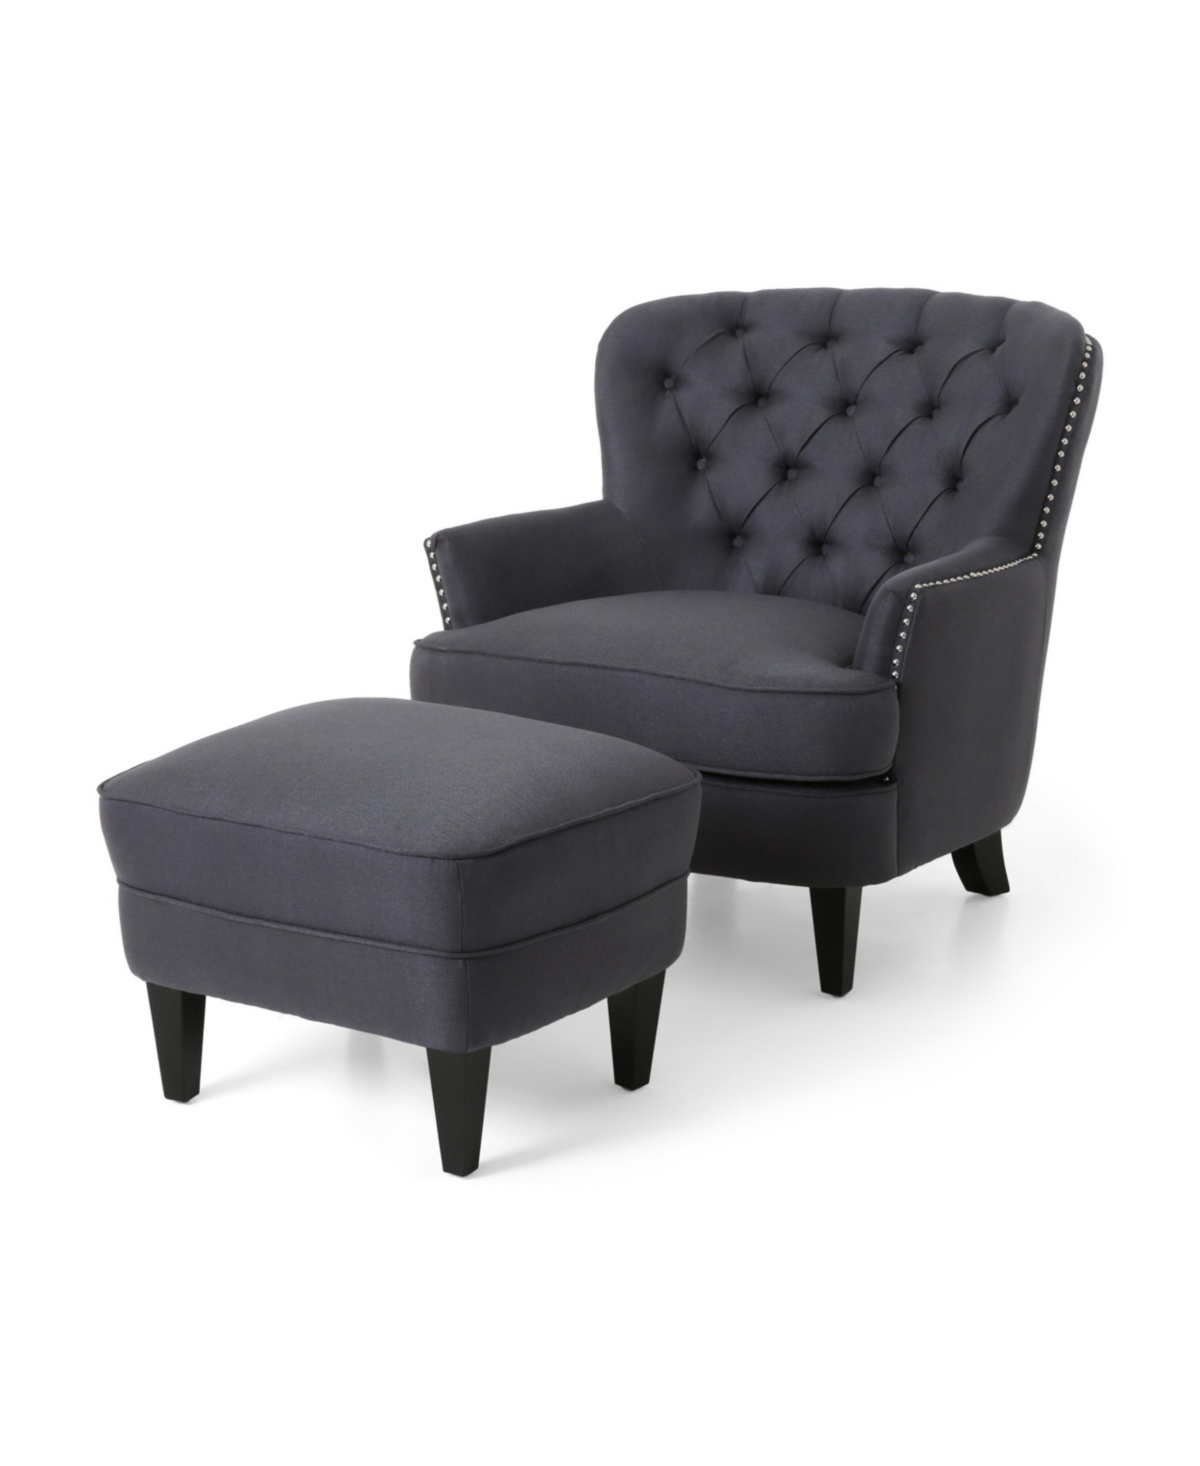 Shop Noble House Correia Contemporary Tufted Club Chair And Ottoman Set, 2 Piece In Gray